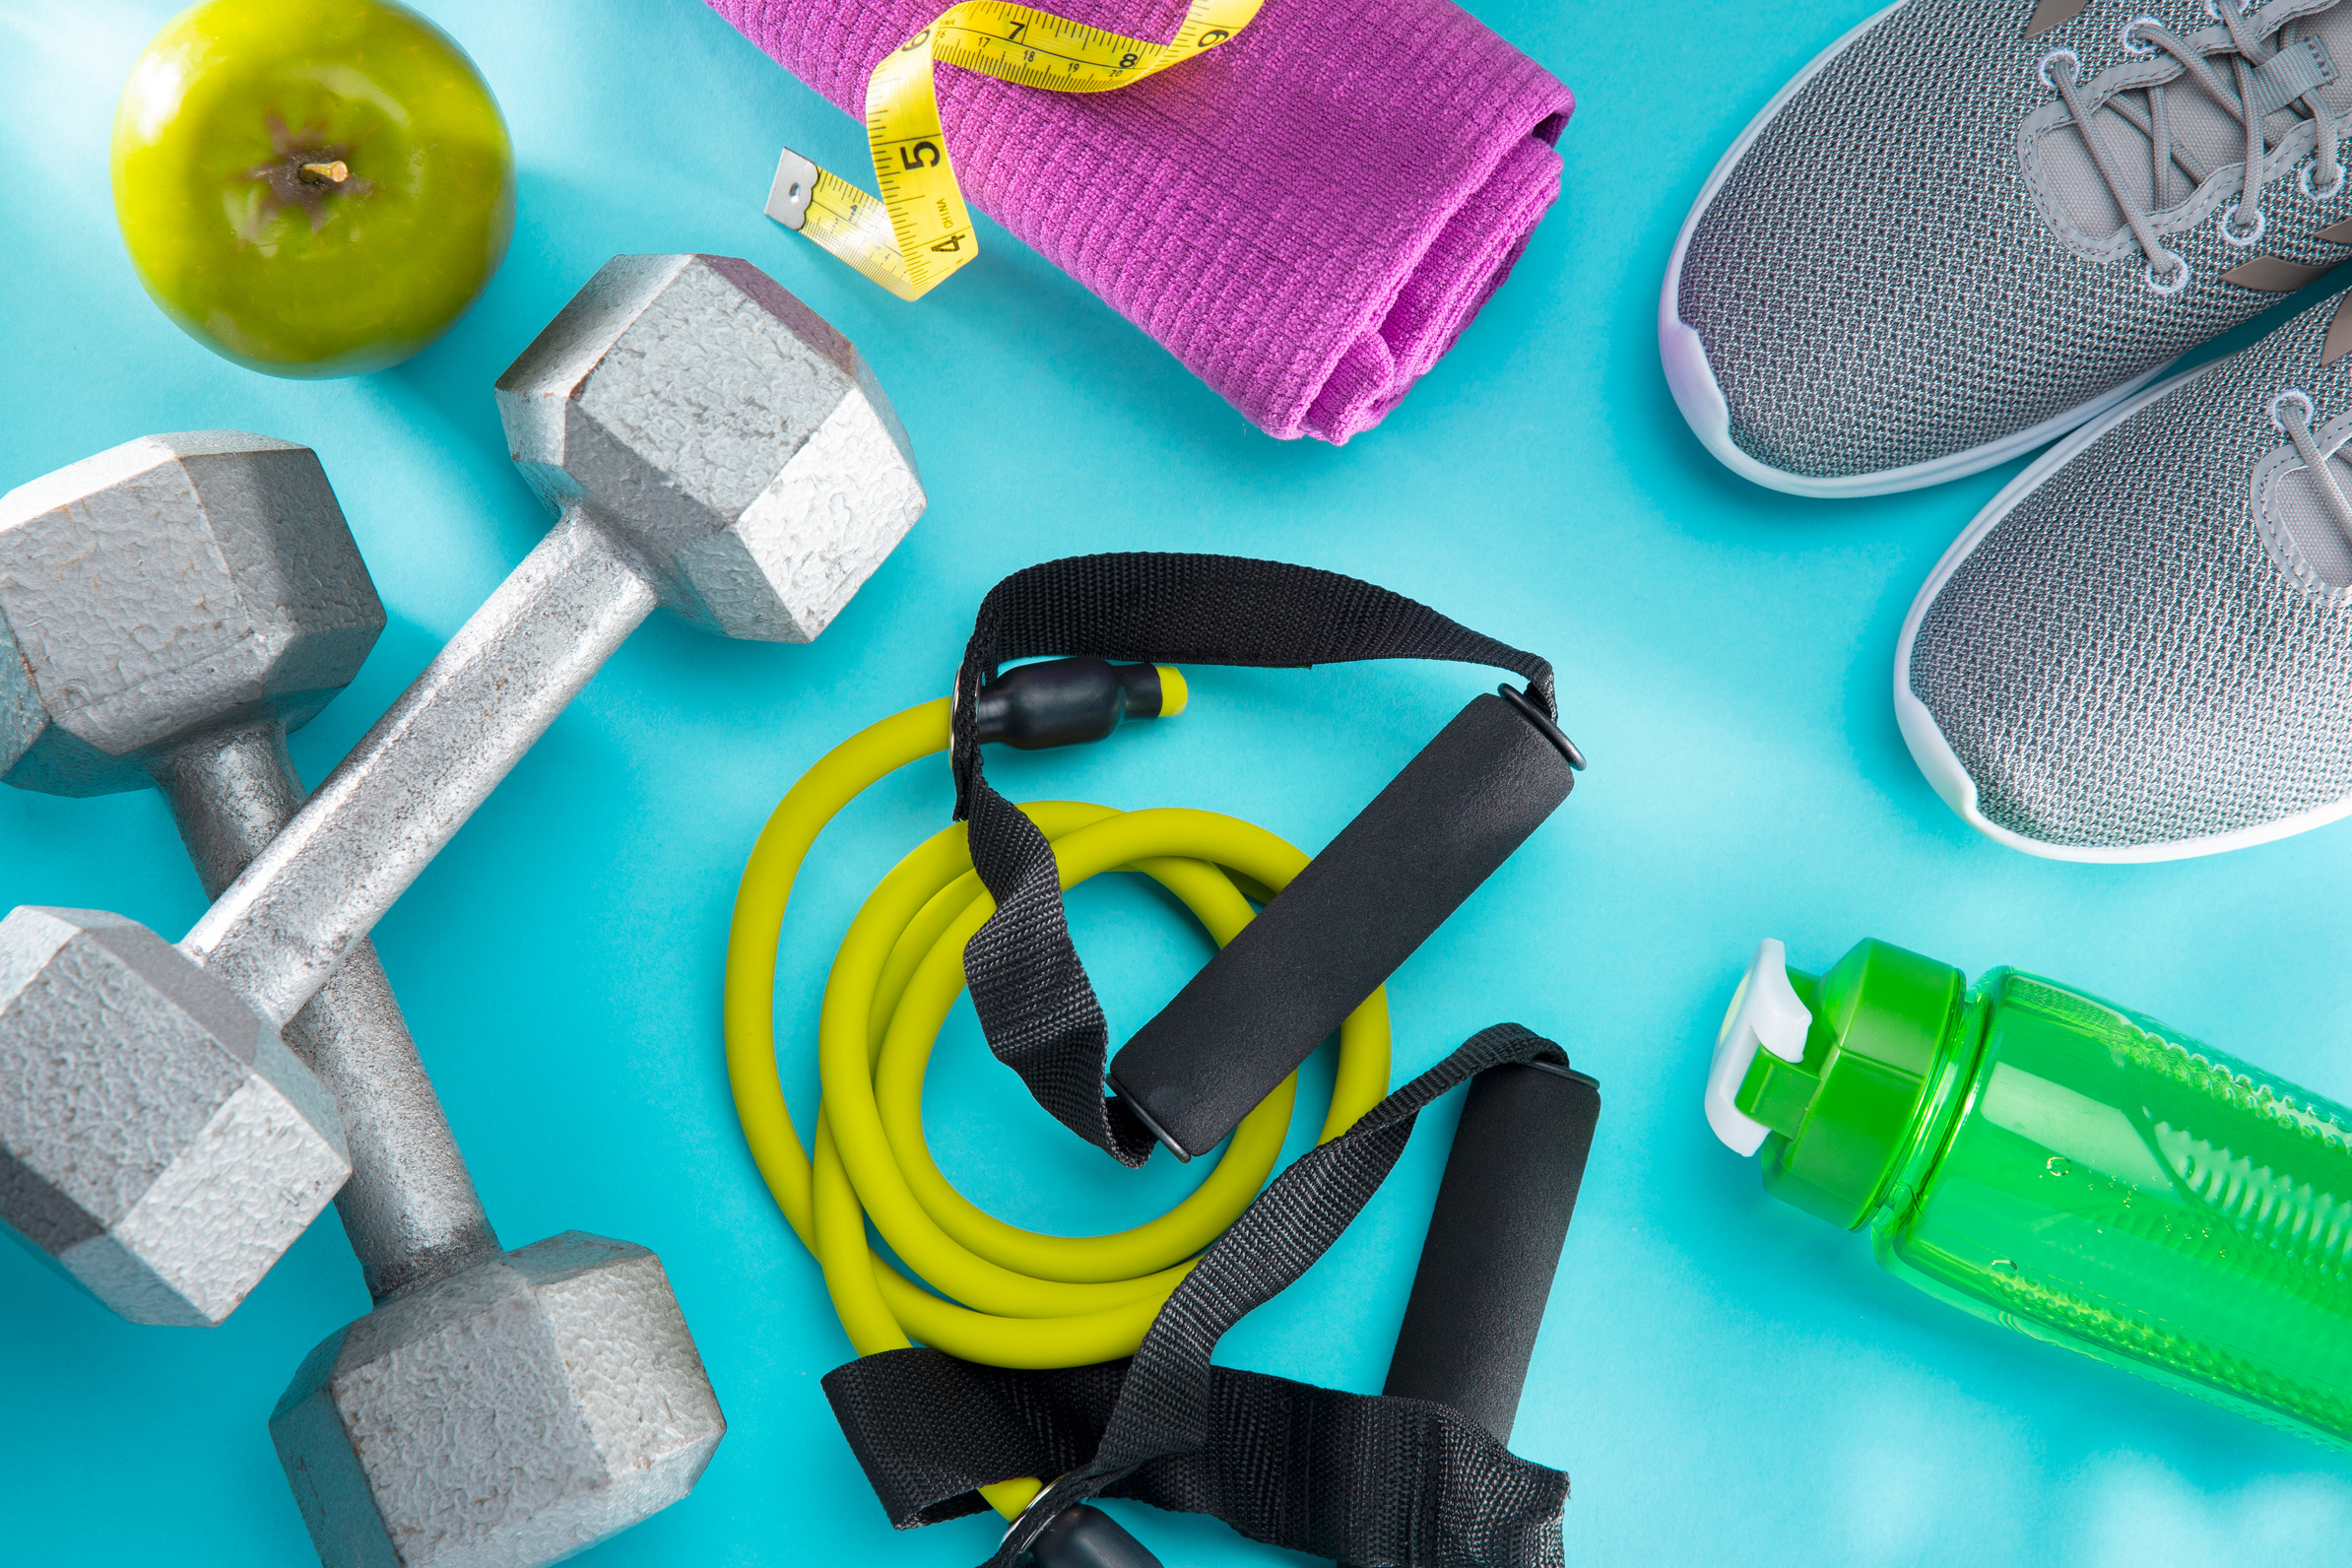 Exercise equipment on a blue background